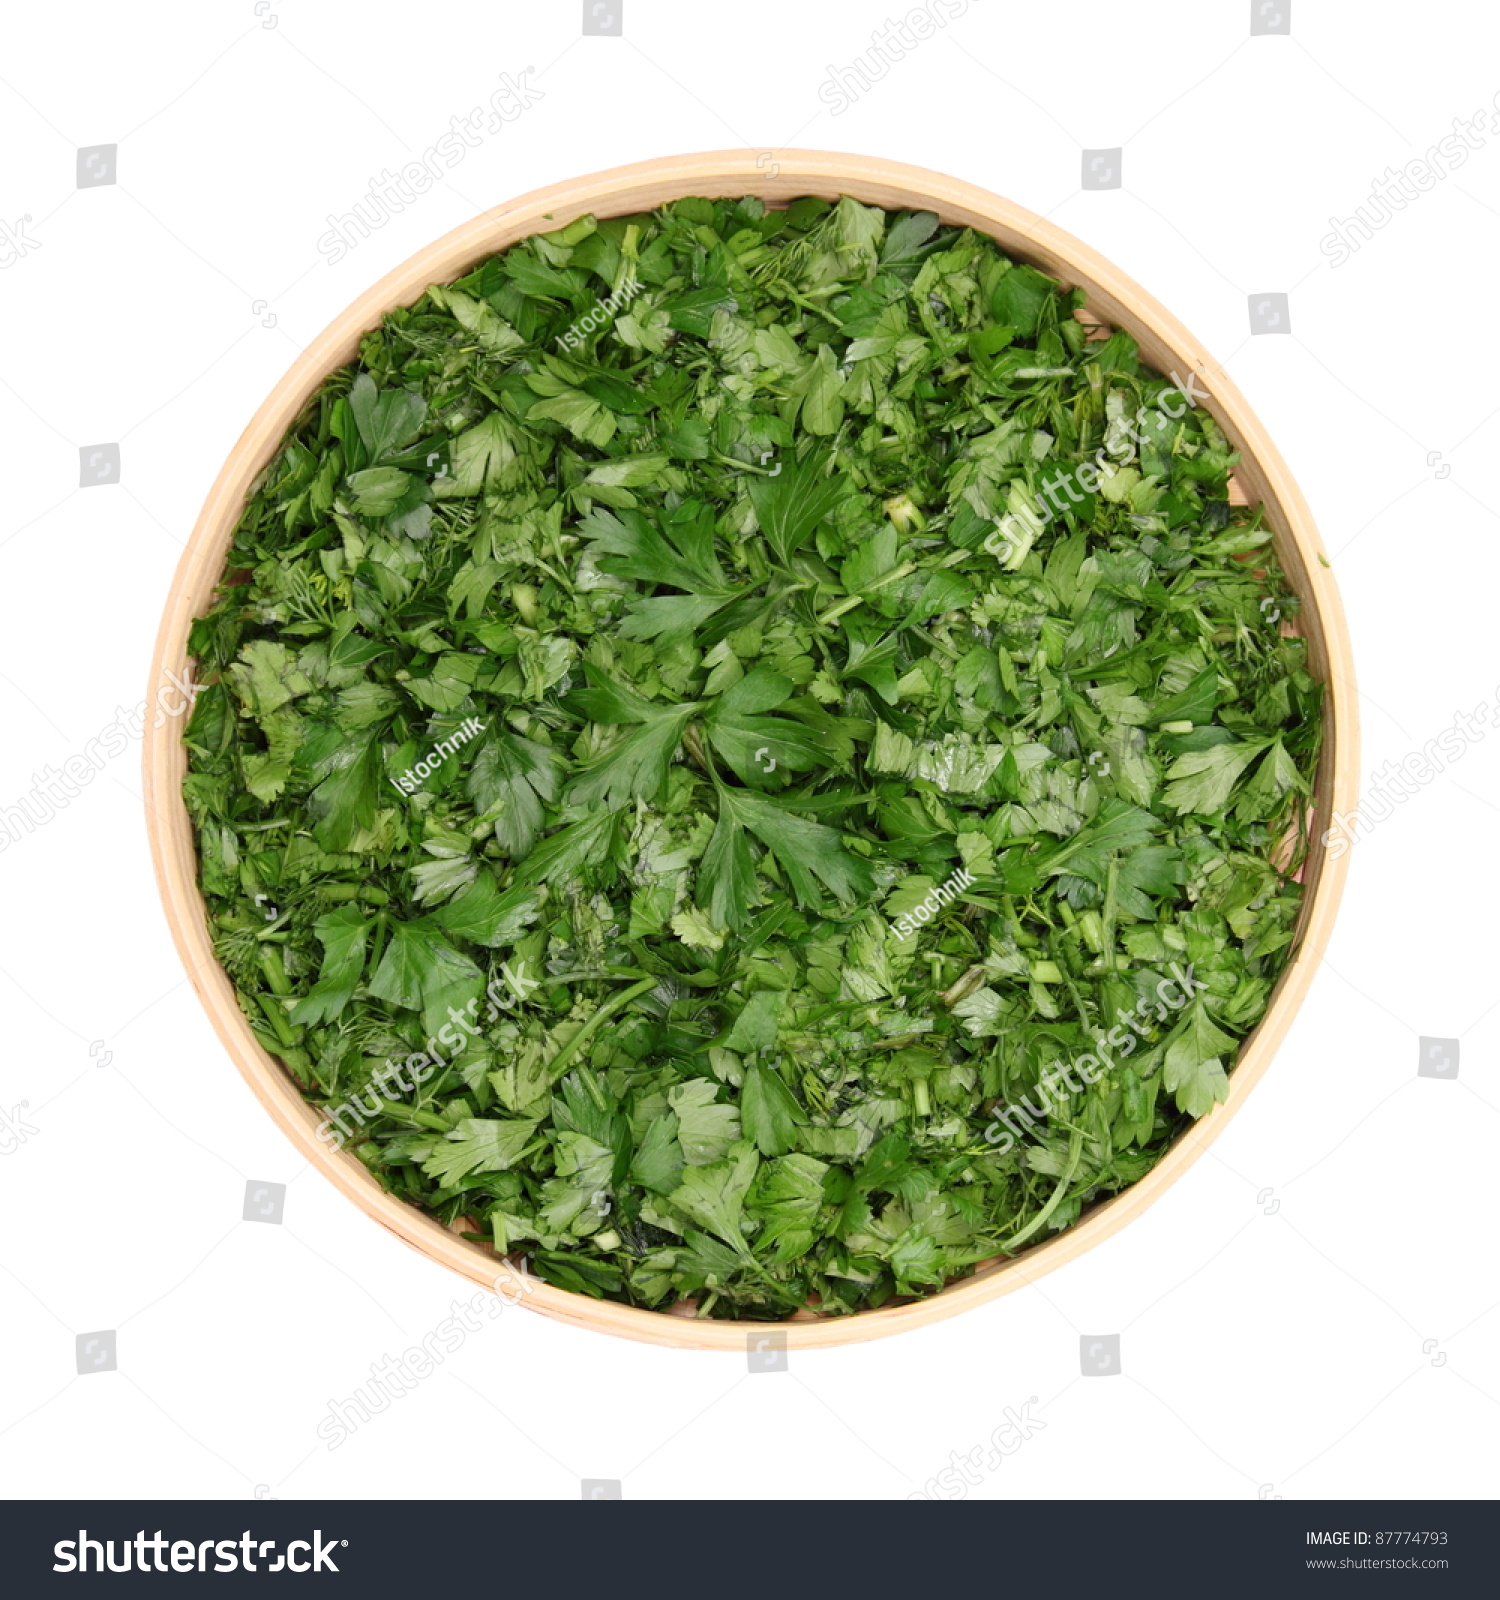 chopped leaves of fresh herbs, parsley, dill, cilantro, basil, in dereyannoy bowl isolated white background #87774793